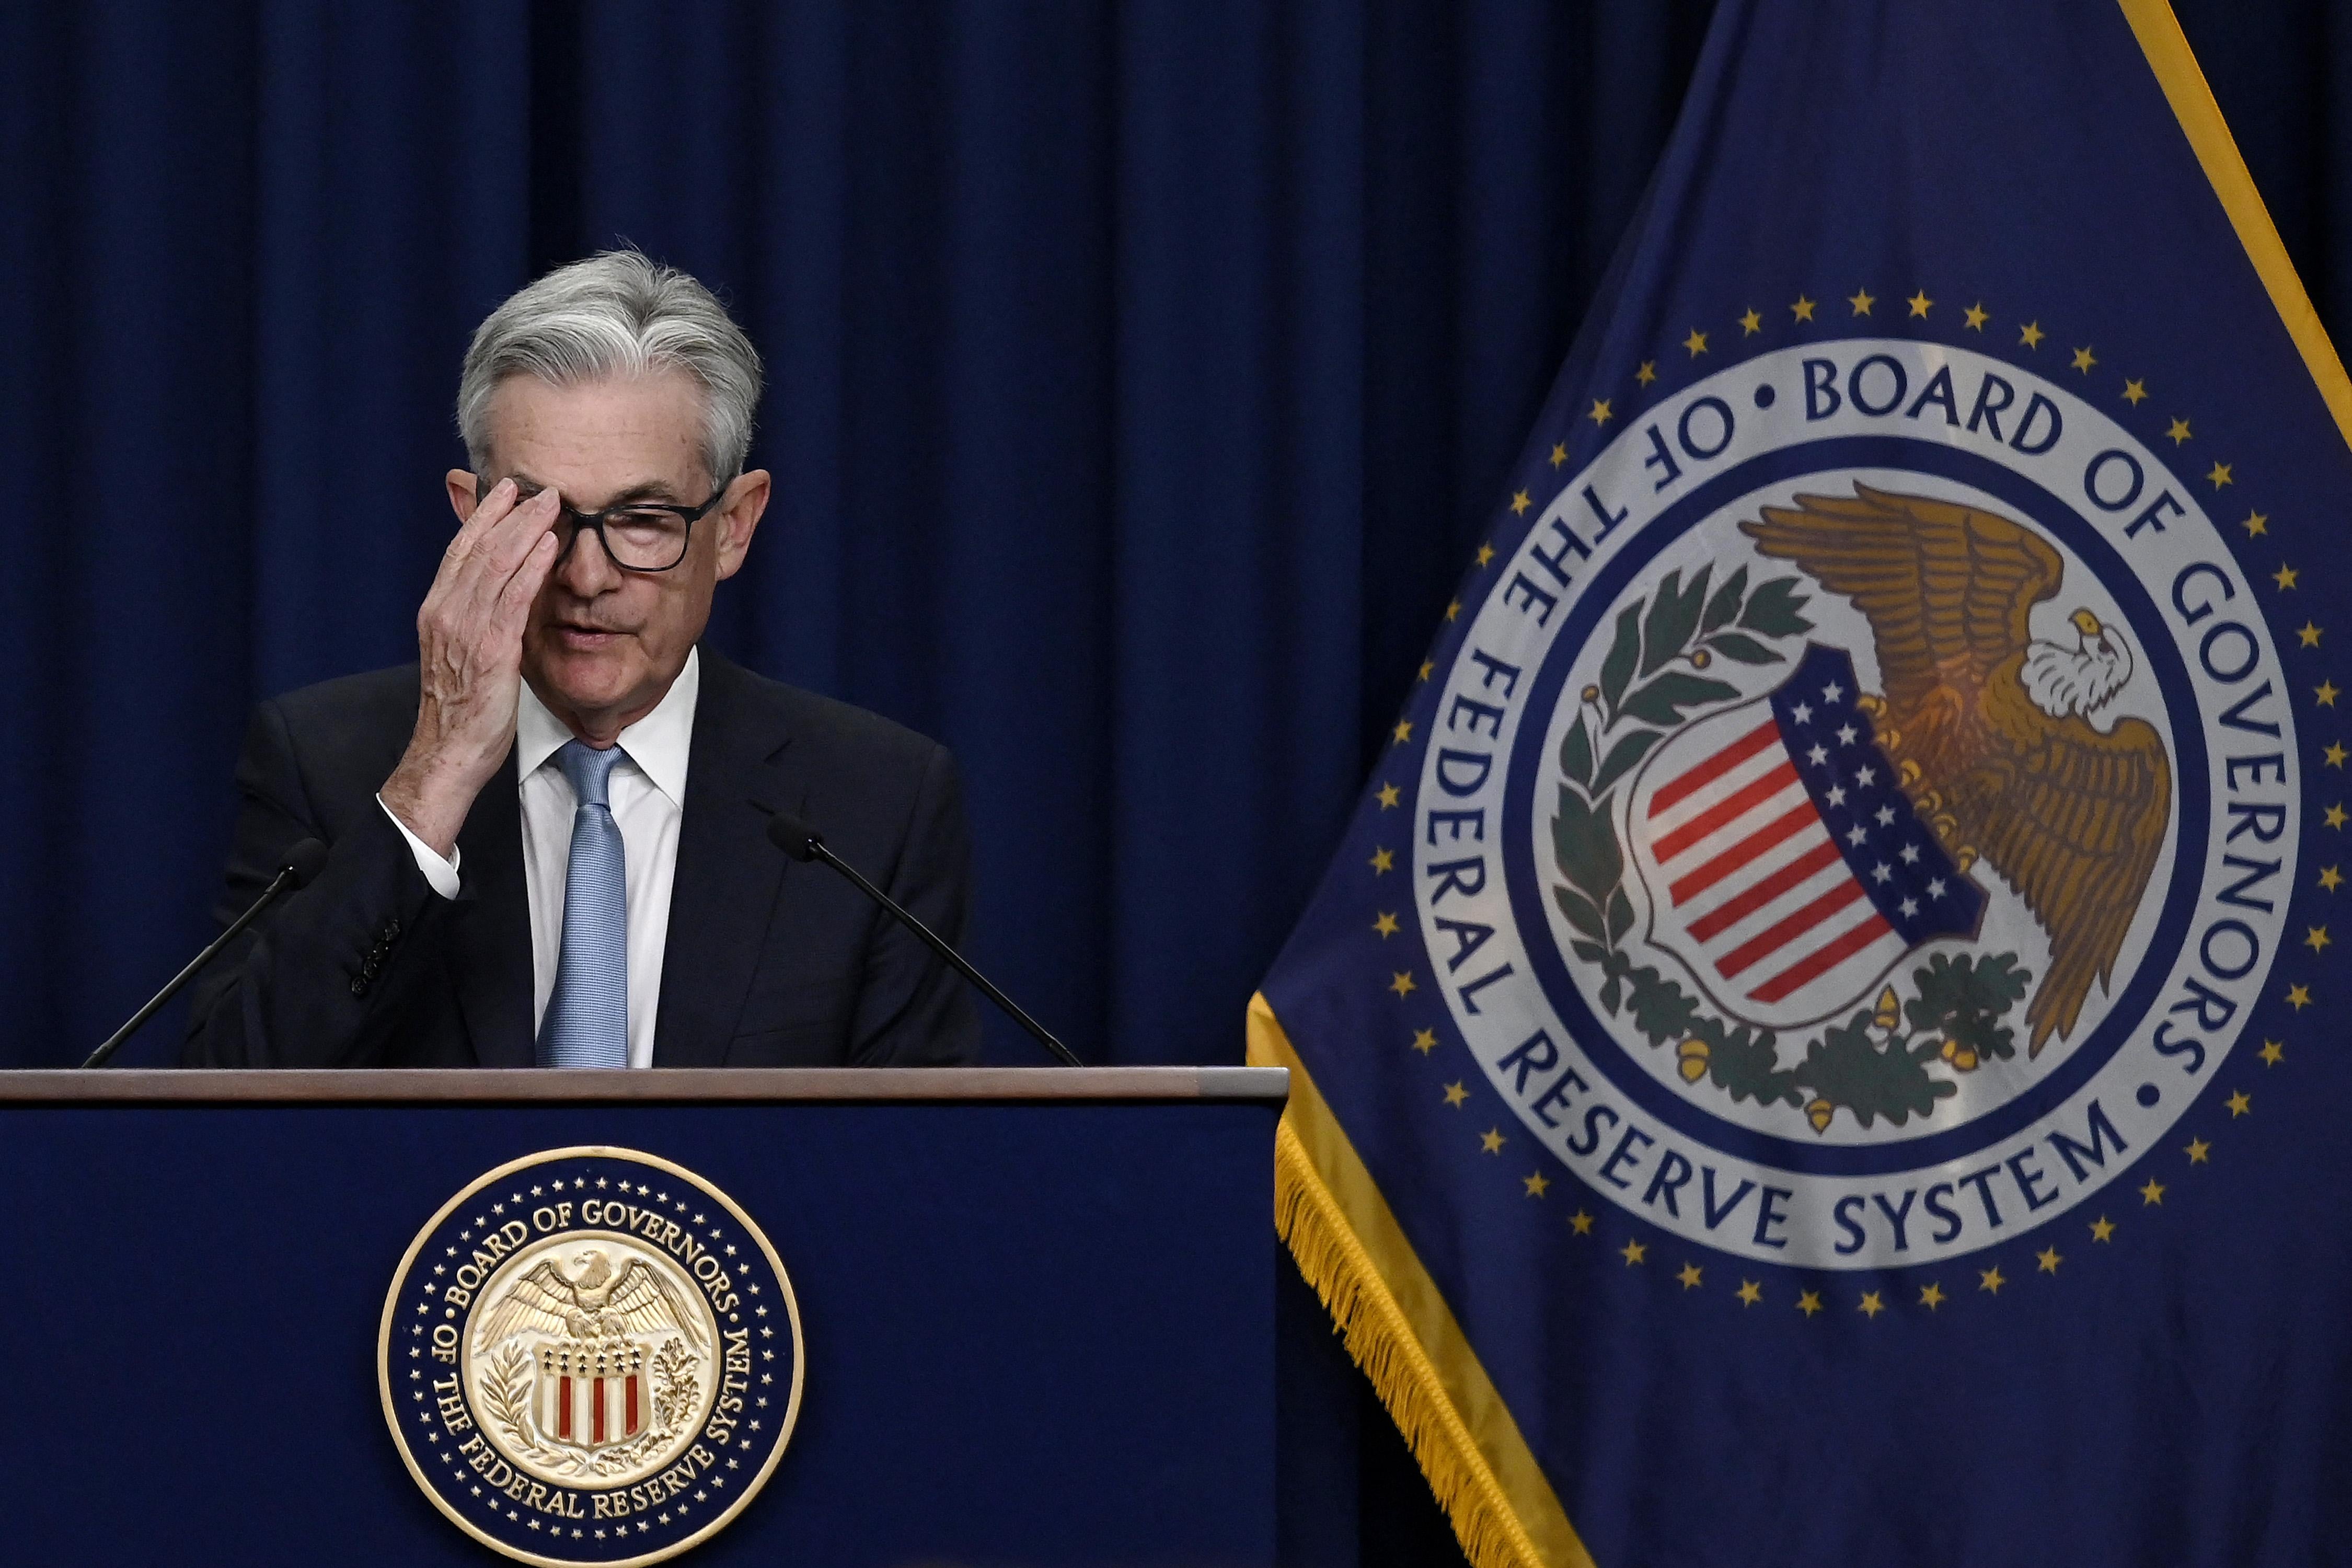 Powell adjusts his glasses as he speaks at a podium